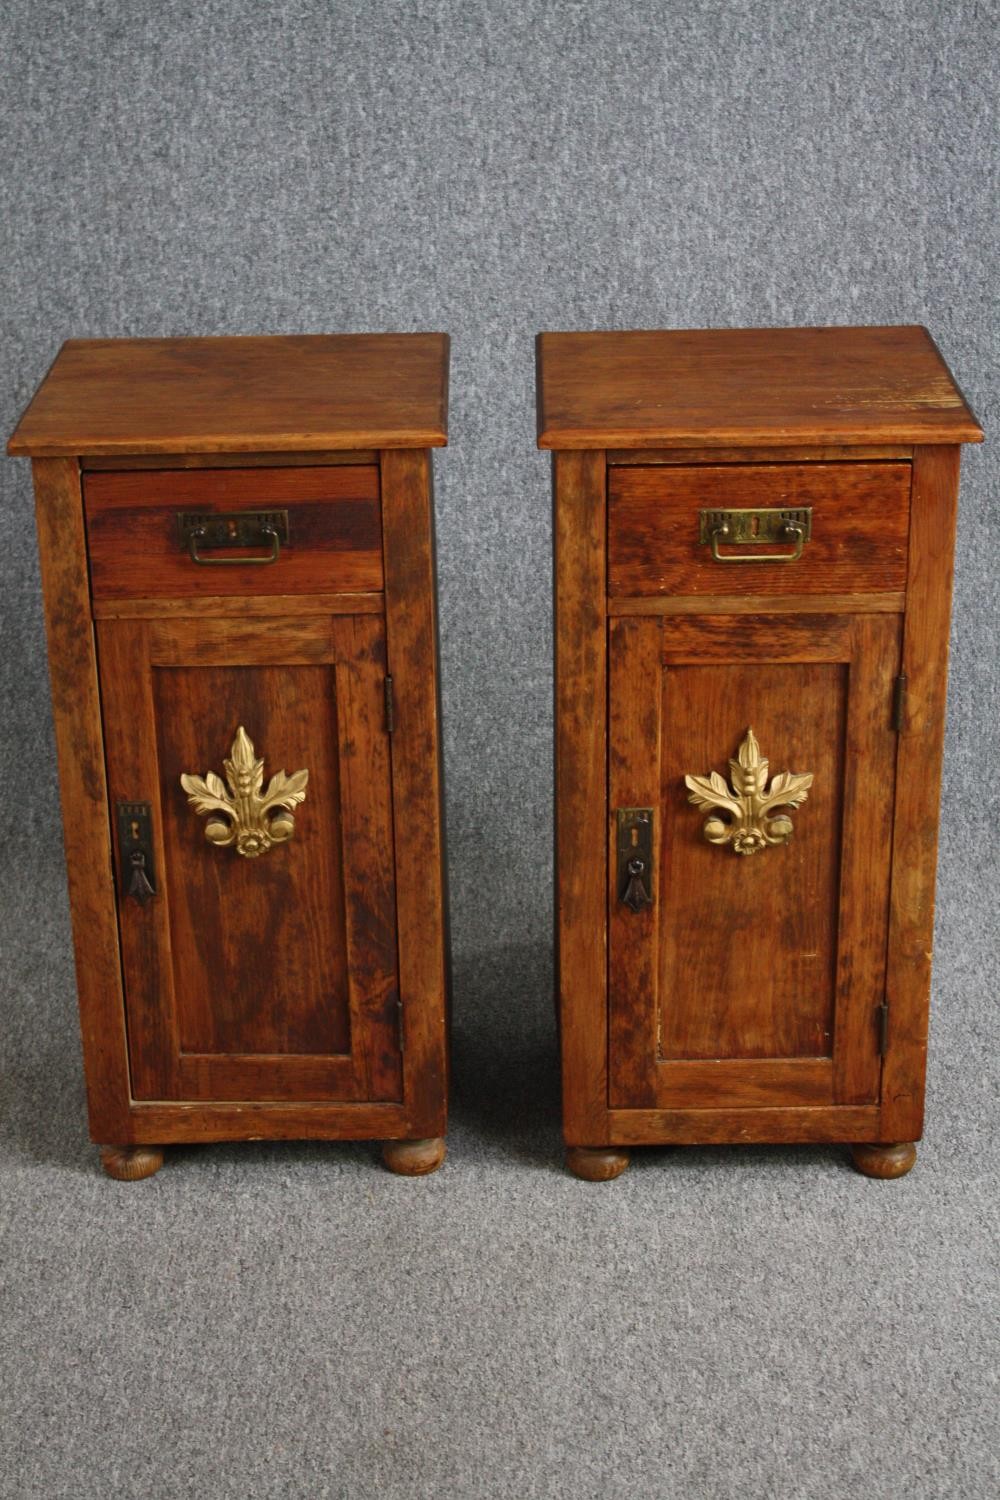 Bedside cabinets, 19th century North European pine. H.78 W.39 D.35cm.